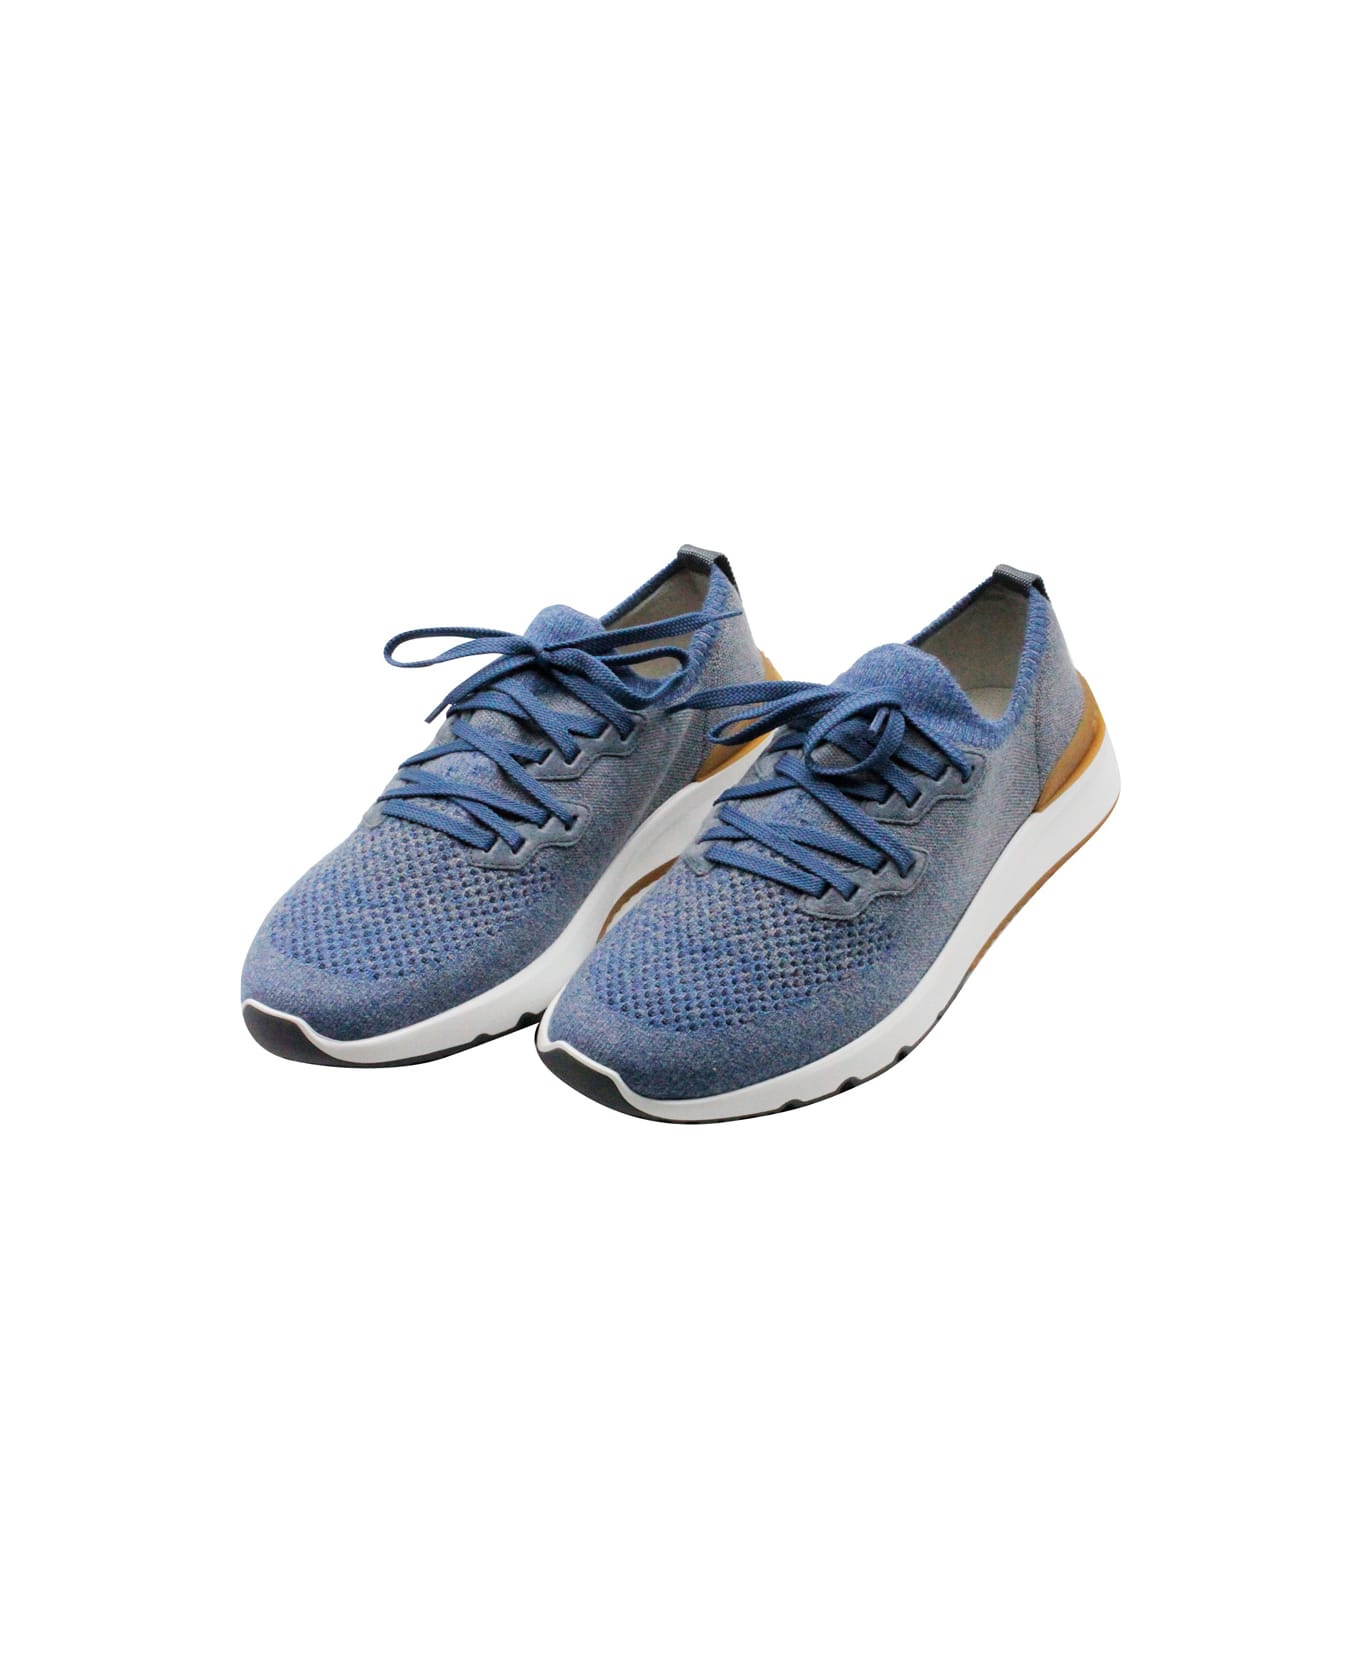 Brunello Cucinelli Slip-on Sneakers In Knitted Fabric With Melange Effect And Contrasting Color Sole - Light Blu スニーカー